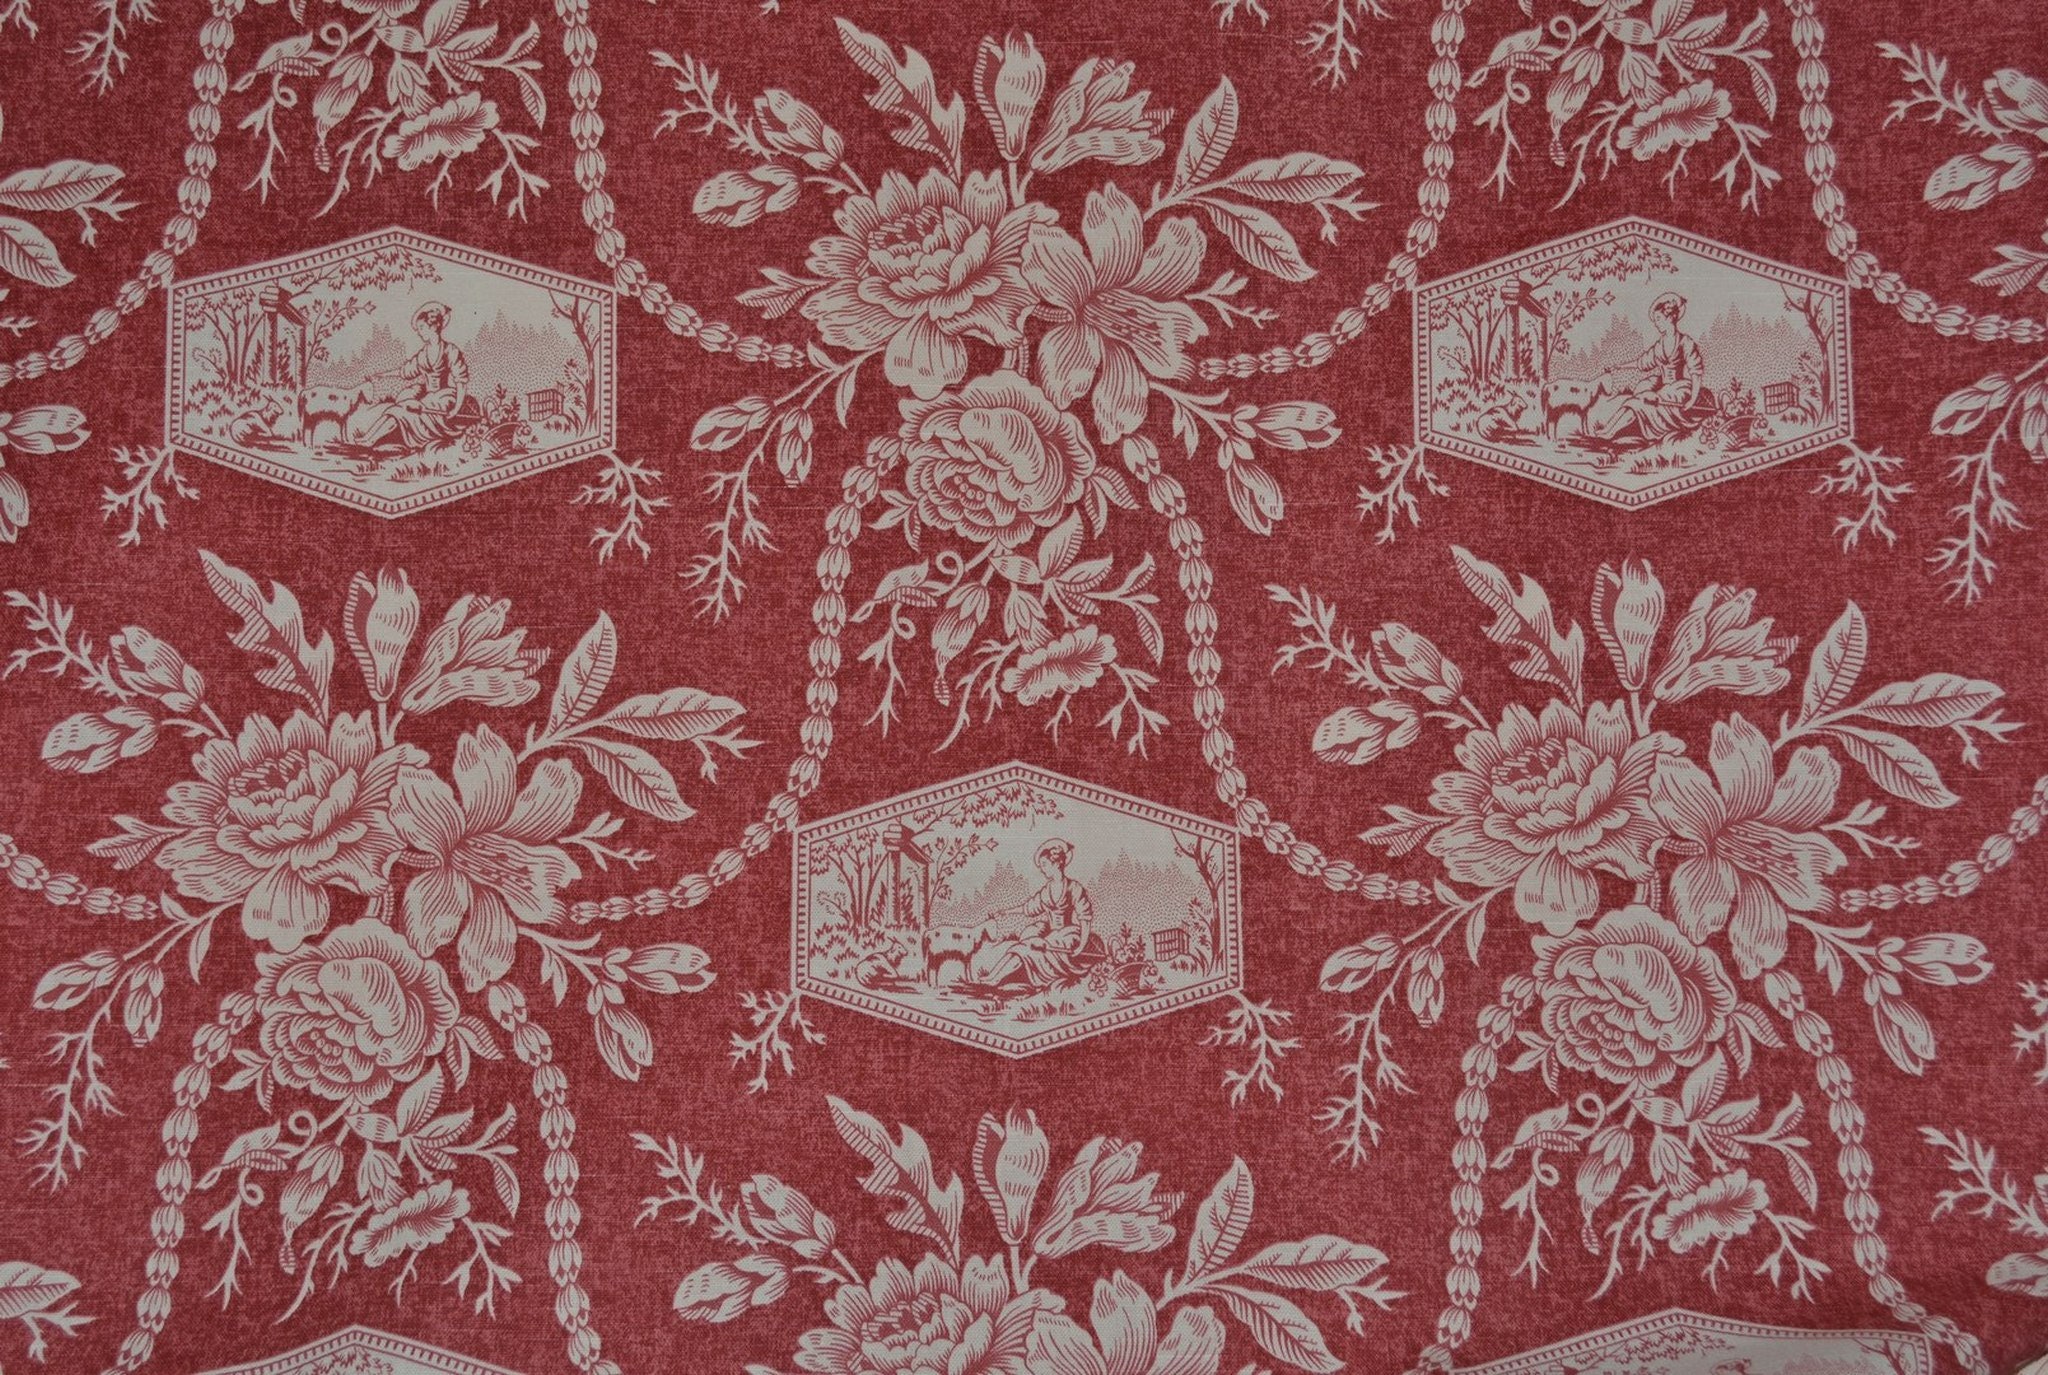 Vintage Laura Ashley Upholstery Fabric Red Toile English Country Print